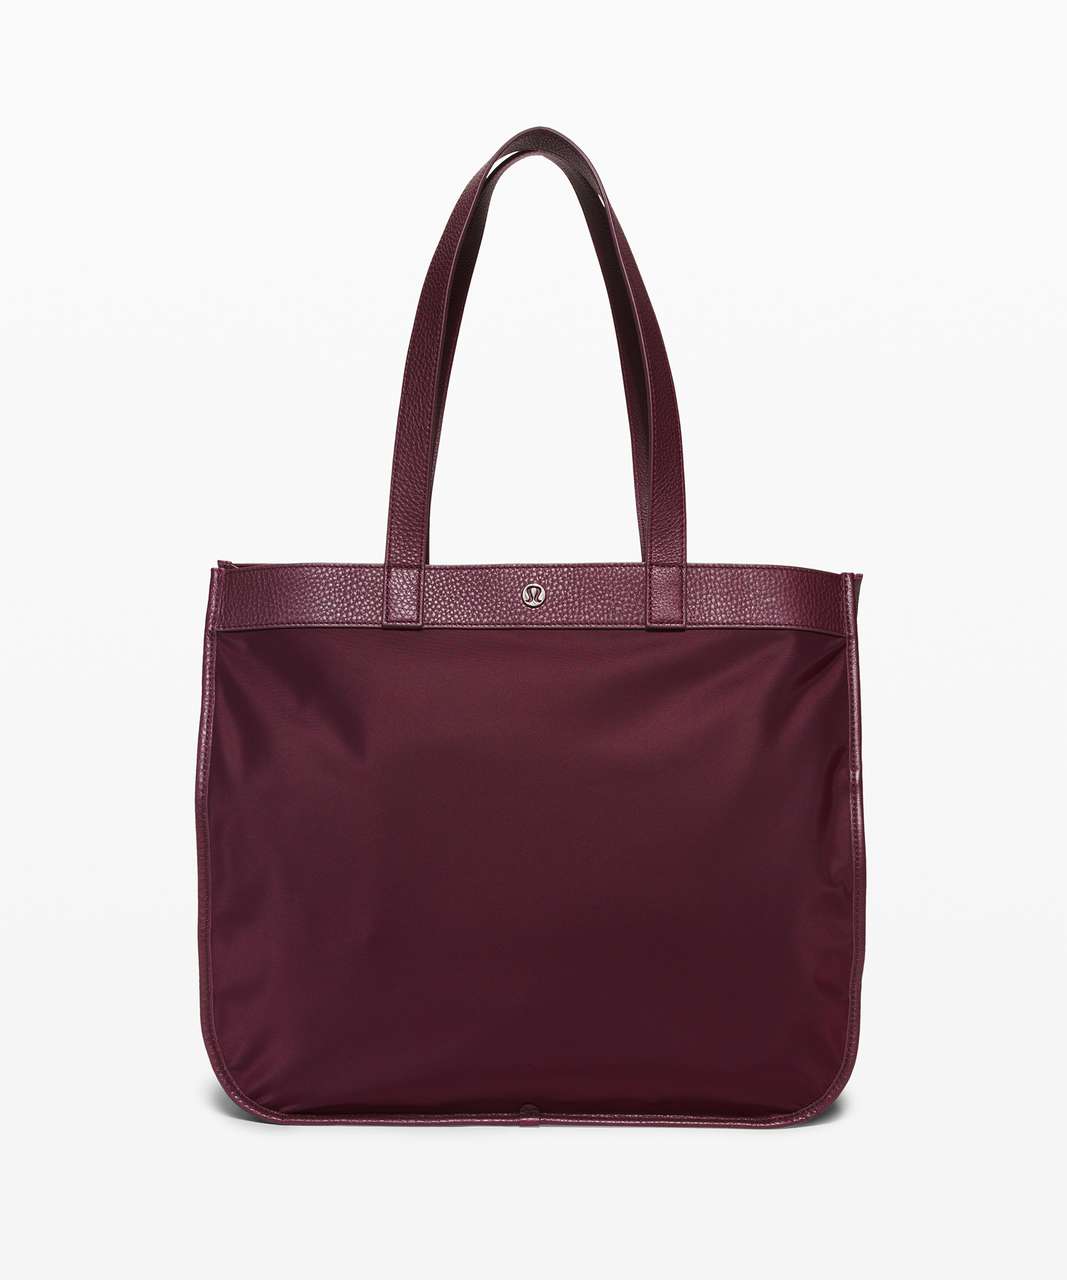 Lululemon Now and Always Tote *Large 25L - Cassis